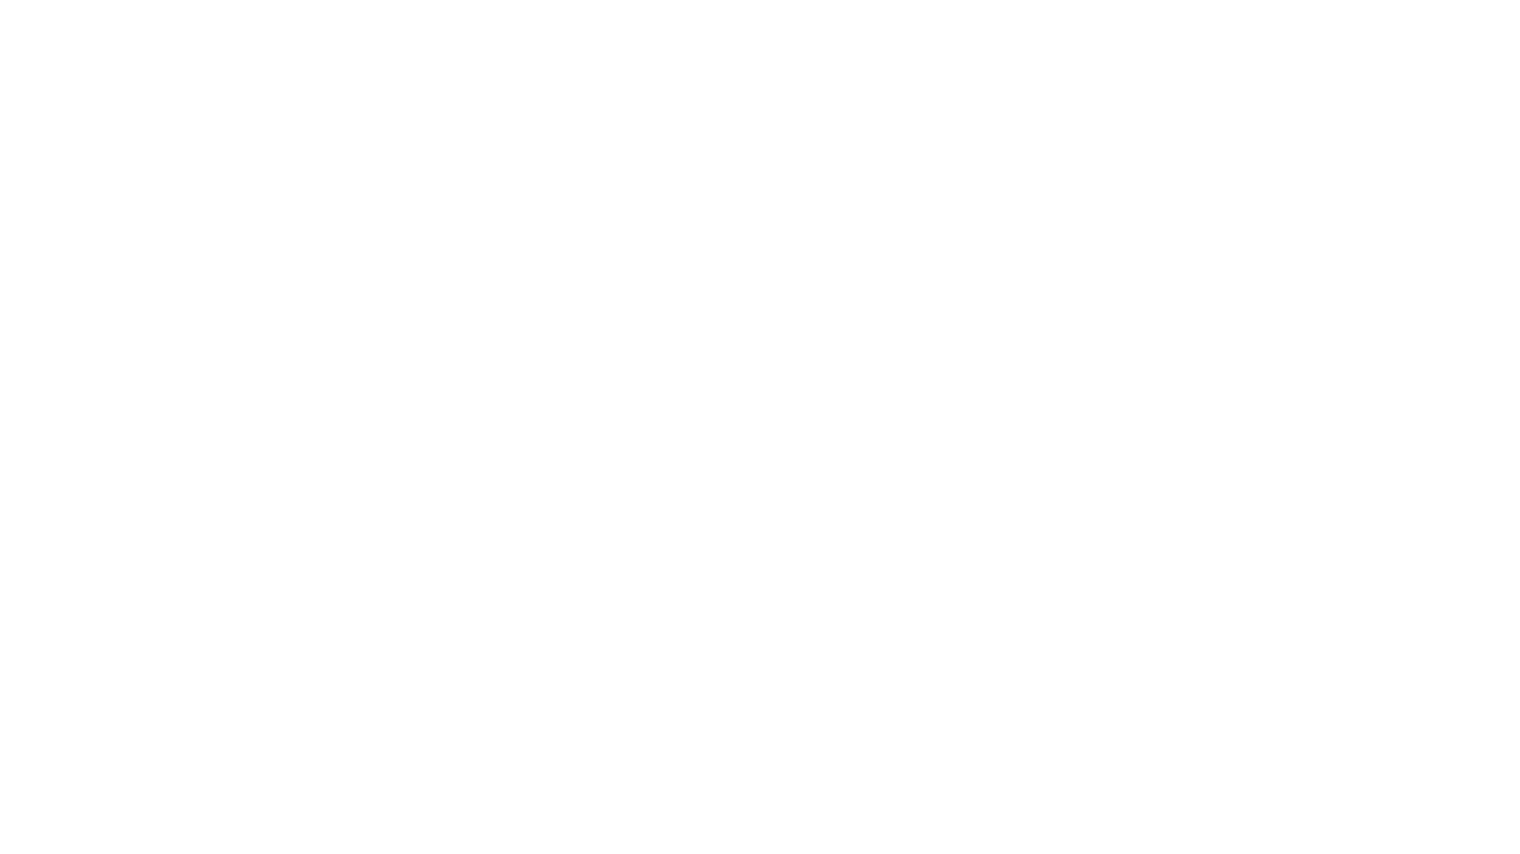 Pacific Basin Shipping logo large for dark backgrounds (transparent PNG)